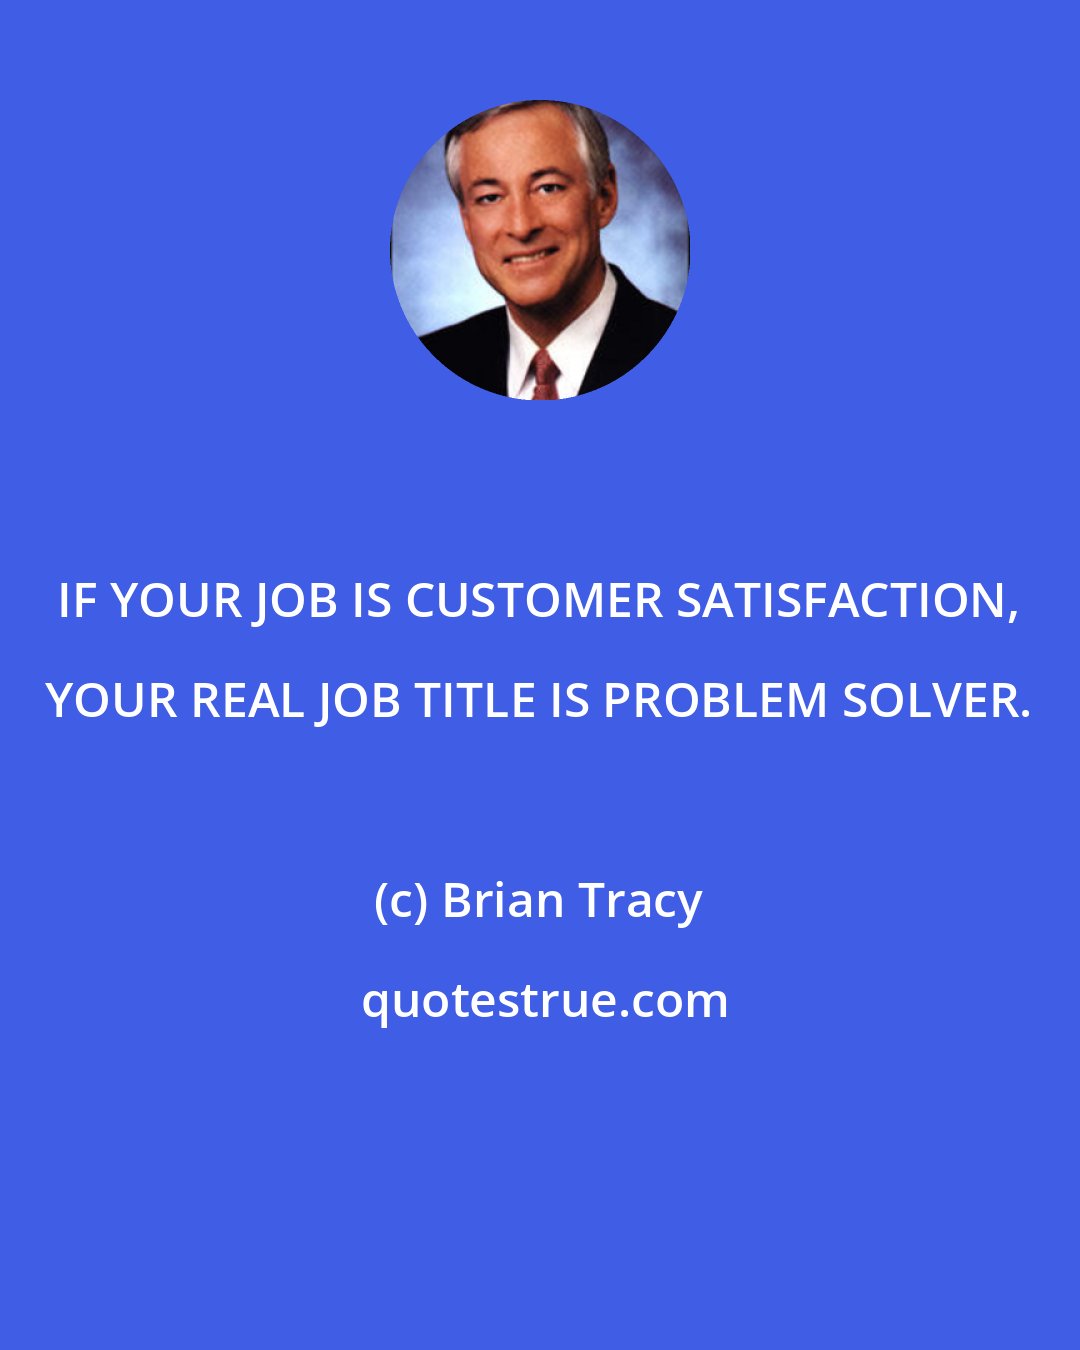 Brian Tracy: IF YOUR JOB IS CUSTOMER SATISFACTION, YOUR REAL JOB TITLE IS PROBLEM SOLVER.